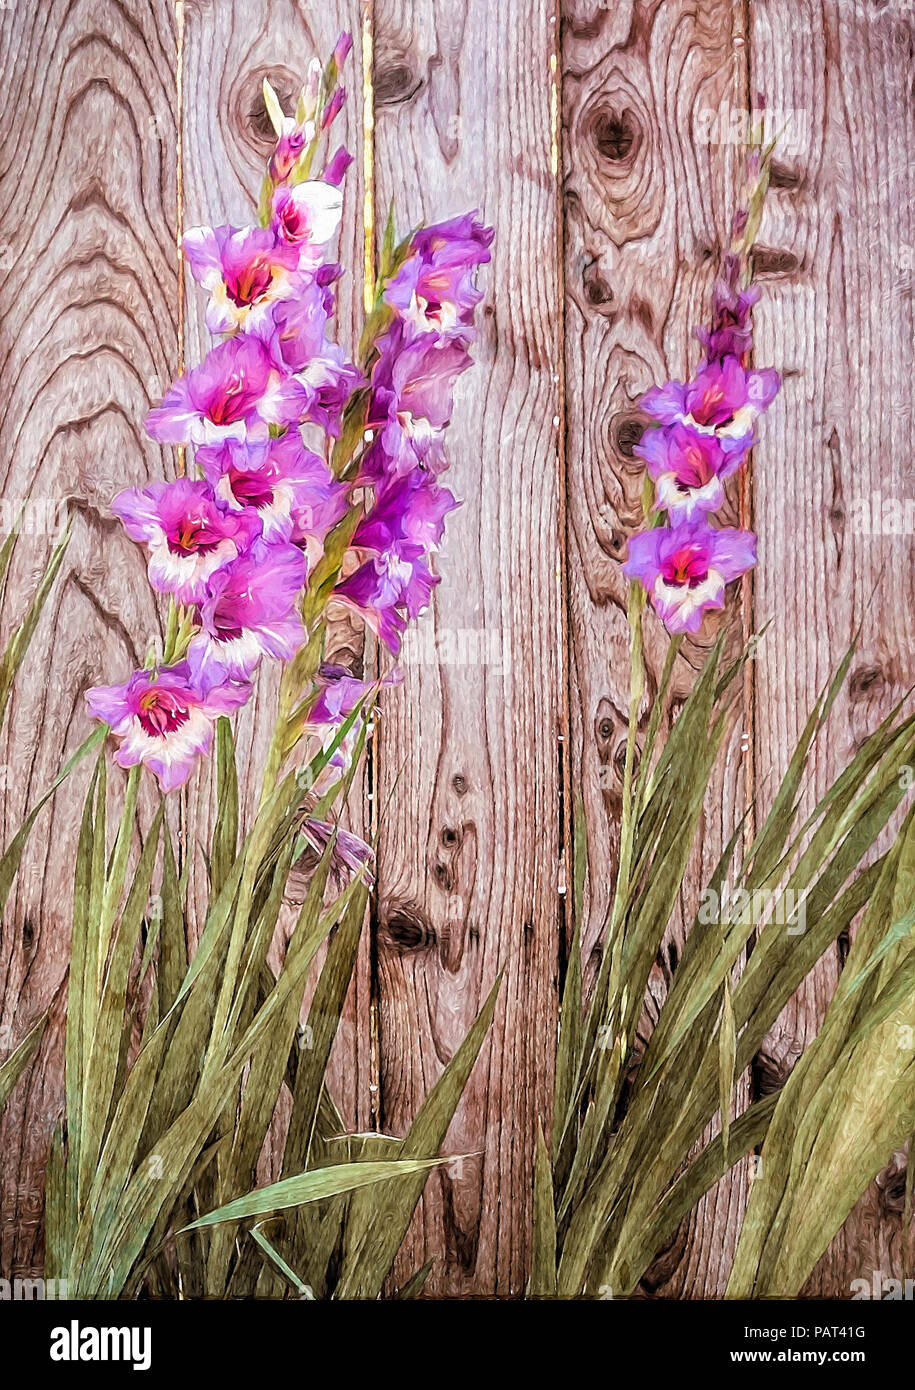 Pink Gladiolus flowers blooming by wood fence in backyard garden during summer oil painting Stock Photo